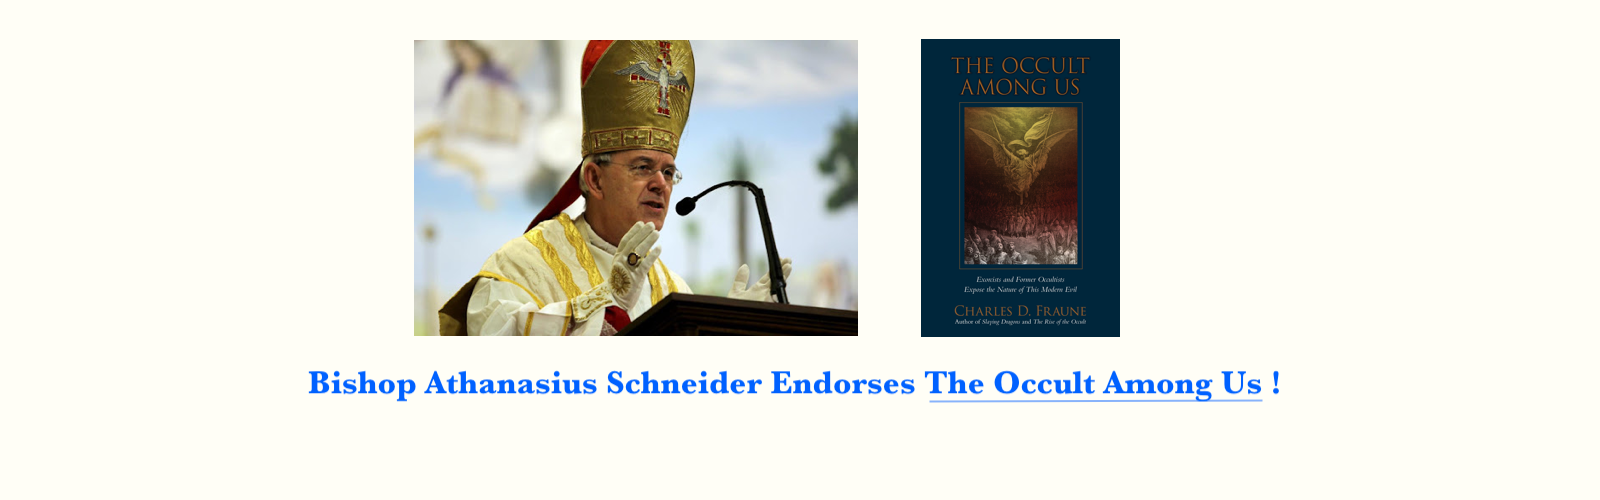 Bishop Athanasius Schneider Endorses new book - "The Occult Among Us"!